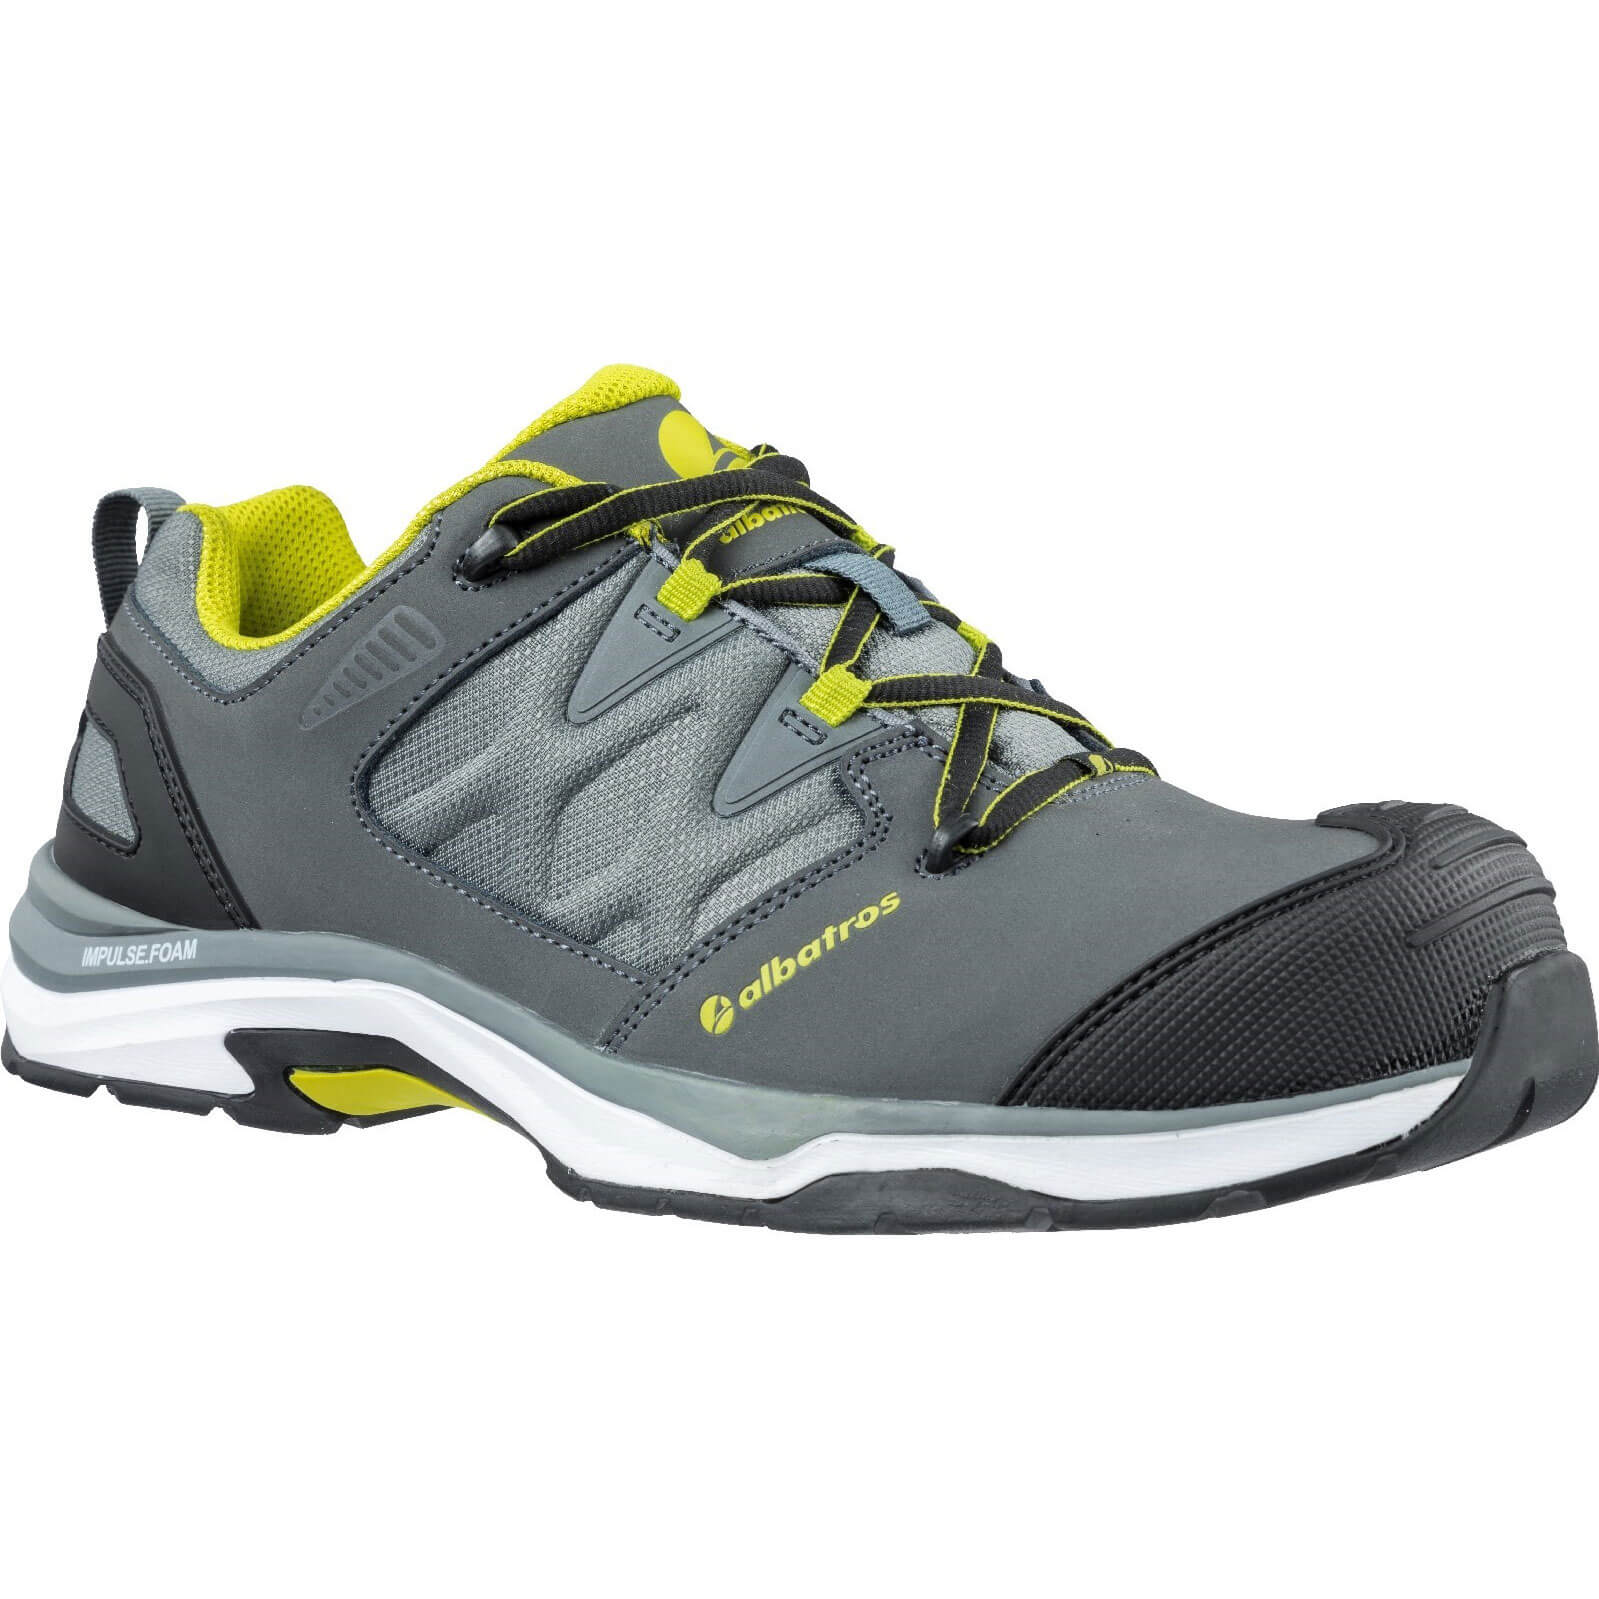 Image of Albatros Ultratrail Low Lace Up Safety Shoe Grey Size 6